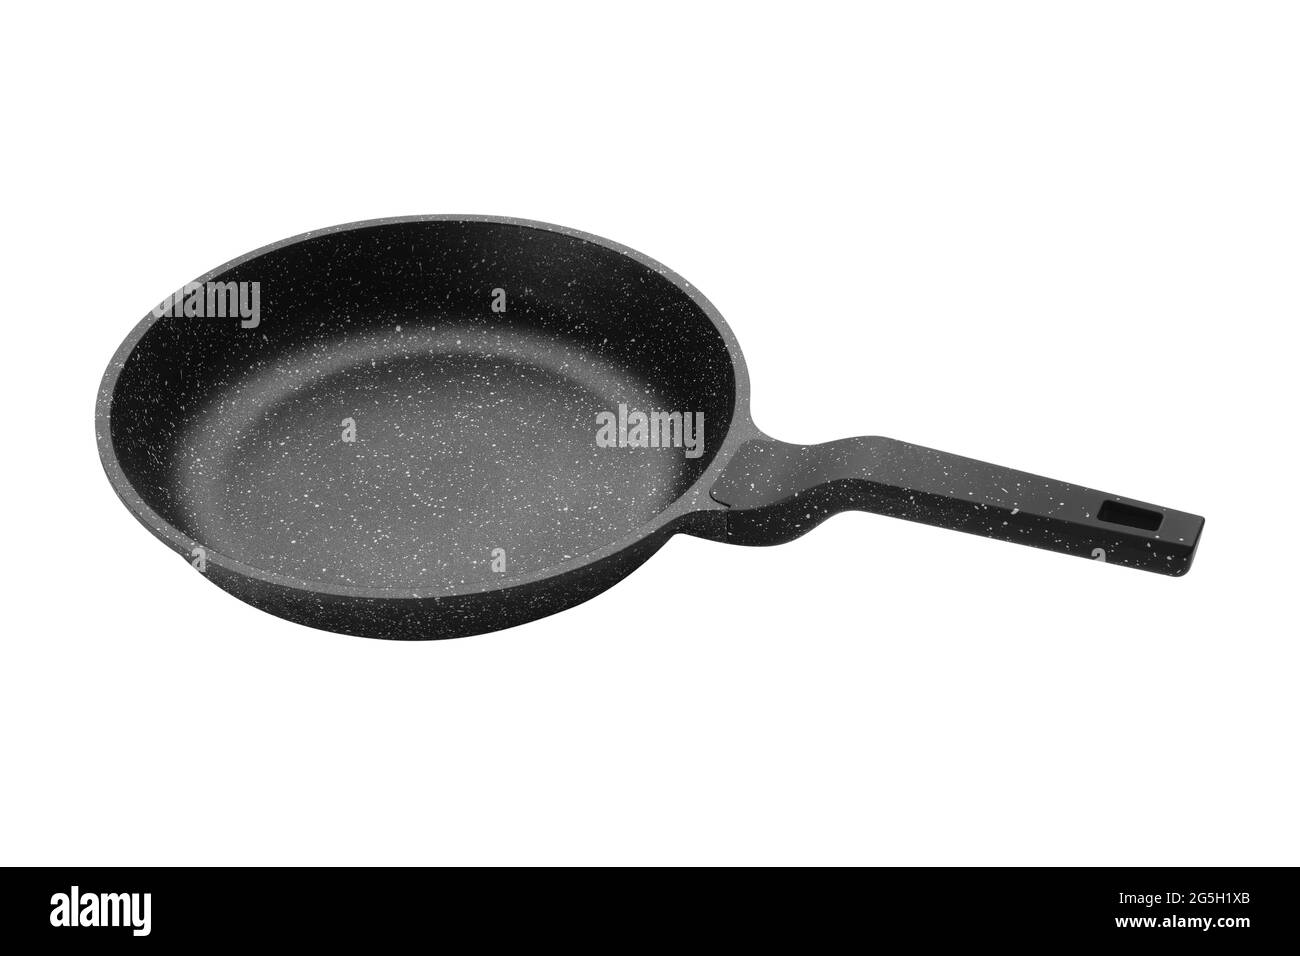 Frying pan with marble covering. Fry pan isolated on white. Stock Photo